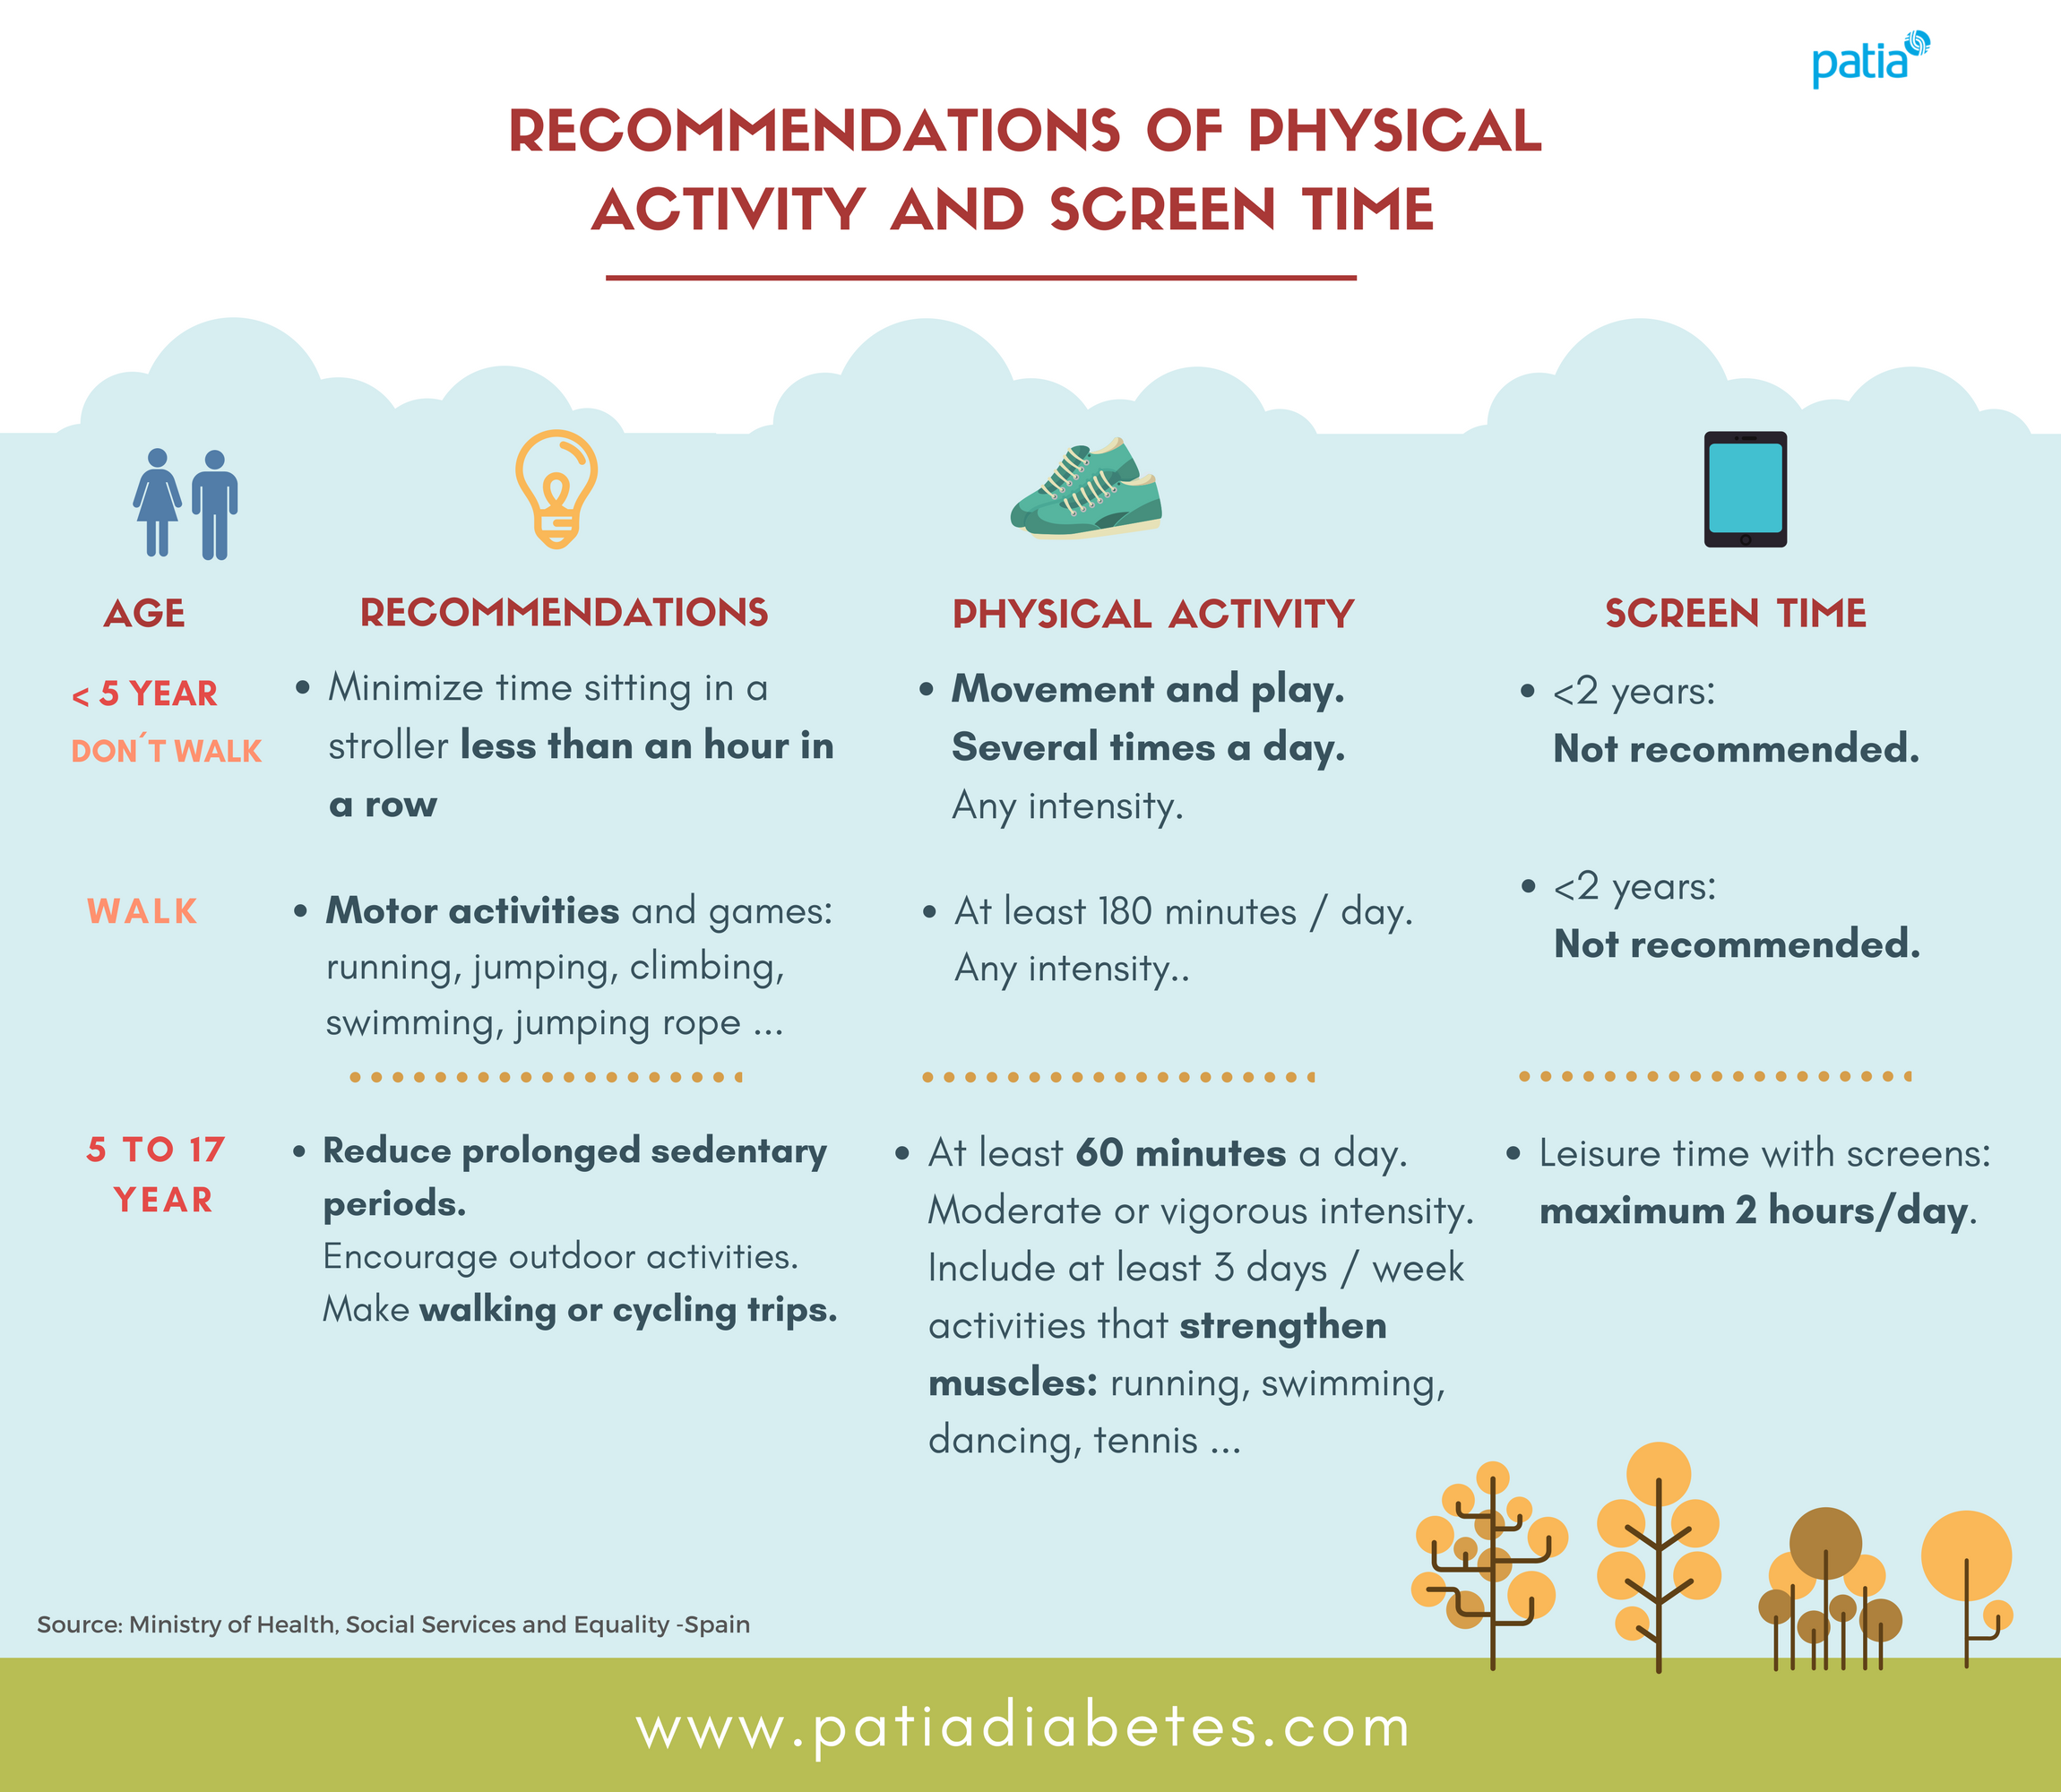 Physical activity sedentarism childhood obesity